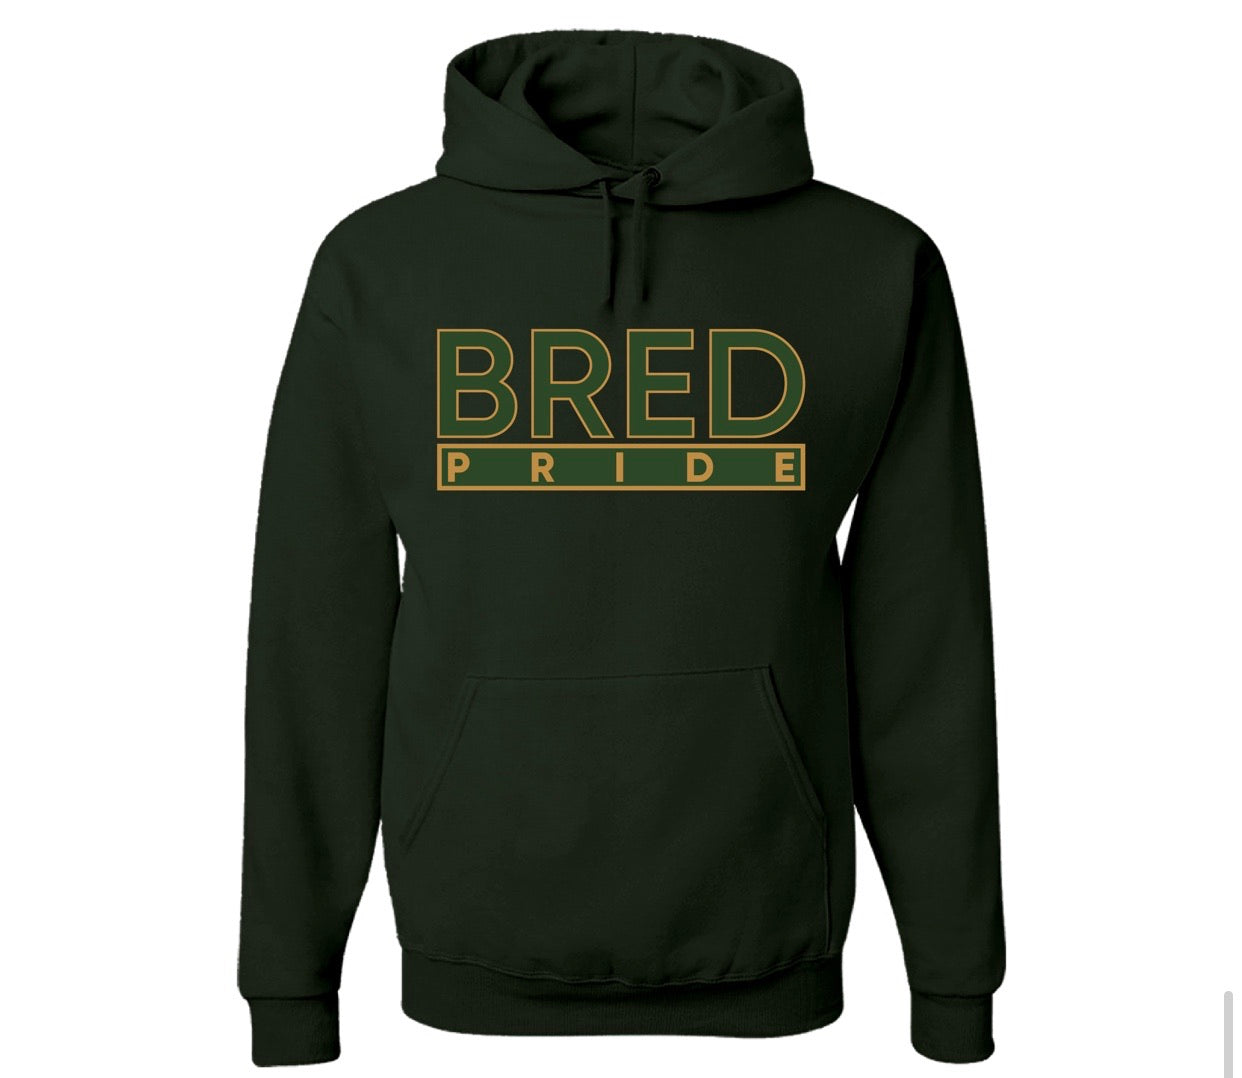 The “BRED Pride” in Forest Green/Gold (KY)